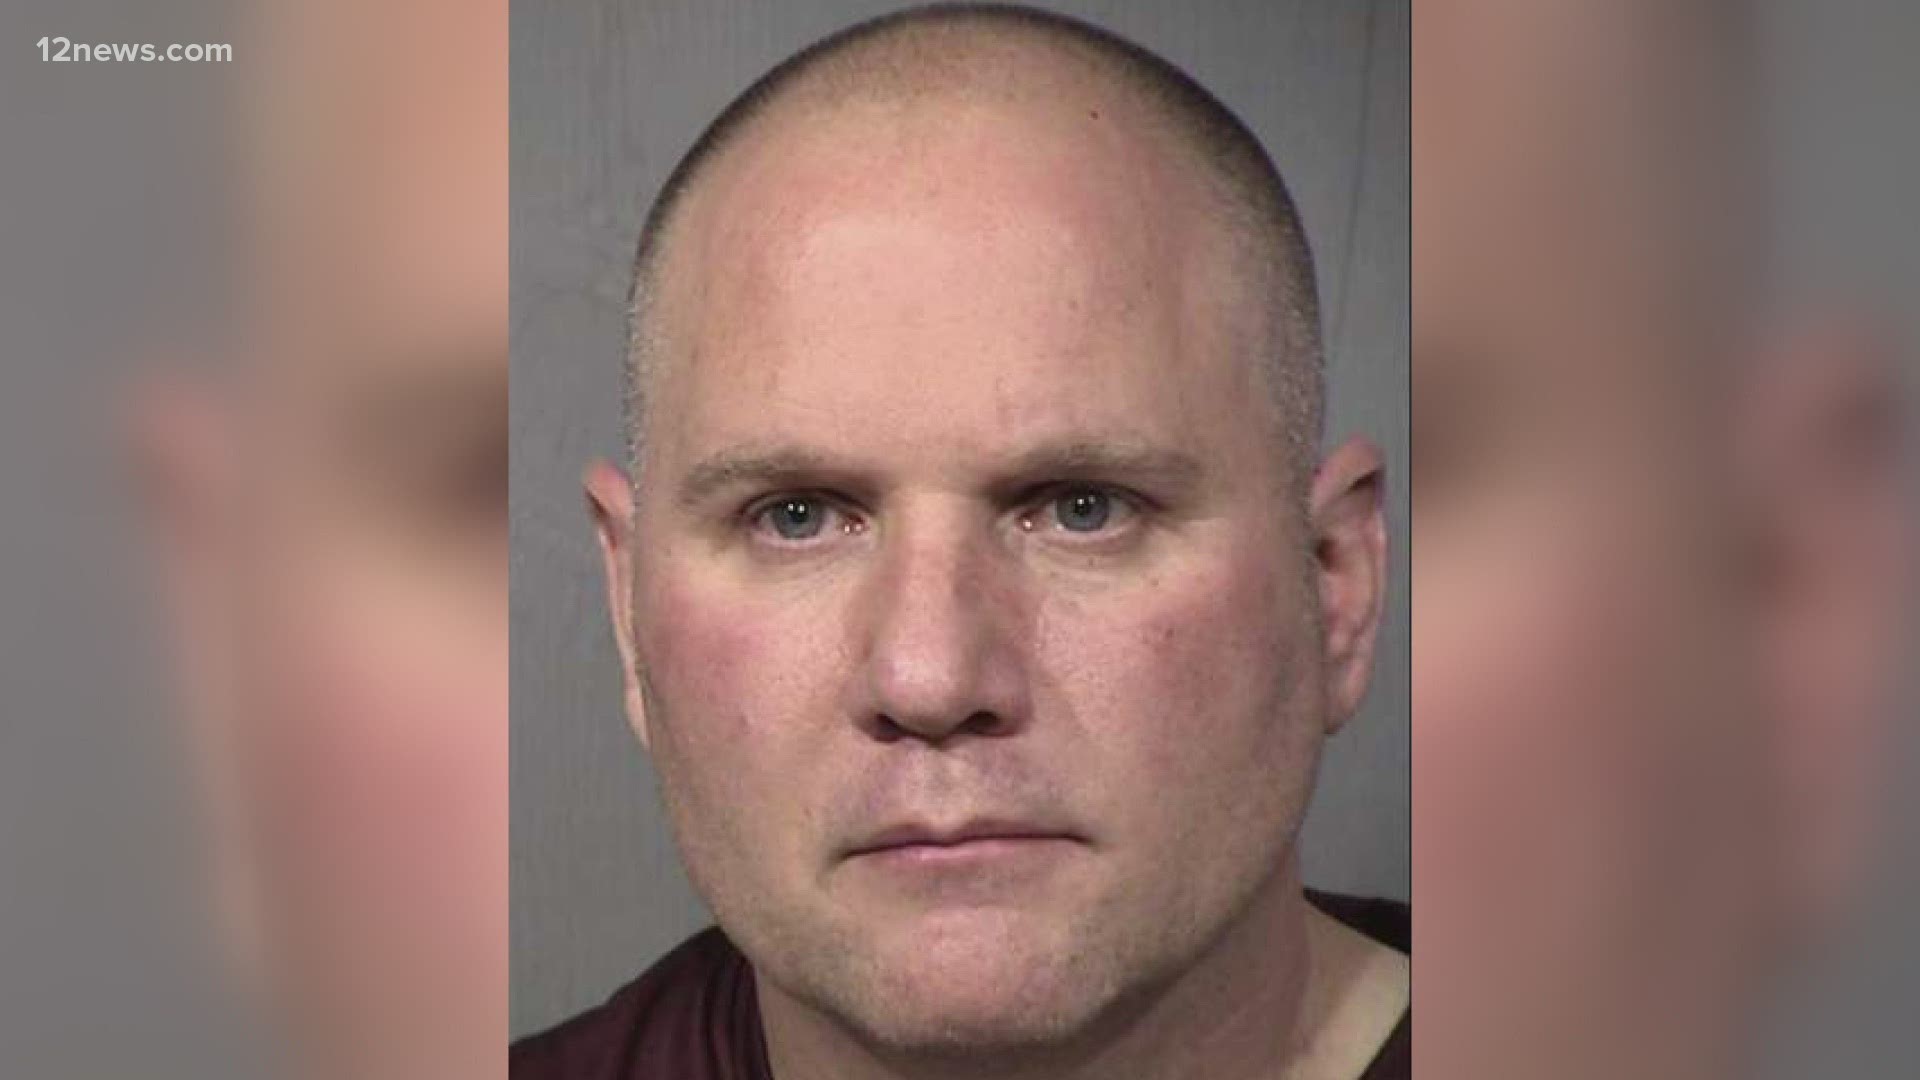 A MCSO deputy has been arrested for sexual misconduct. MCSO says he crossed ethical and legal boundaries with an alleged victim of domestic violence.